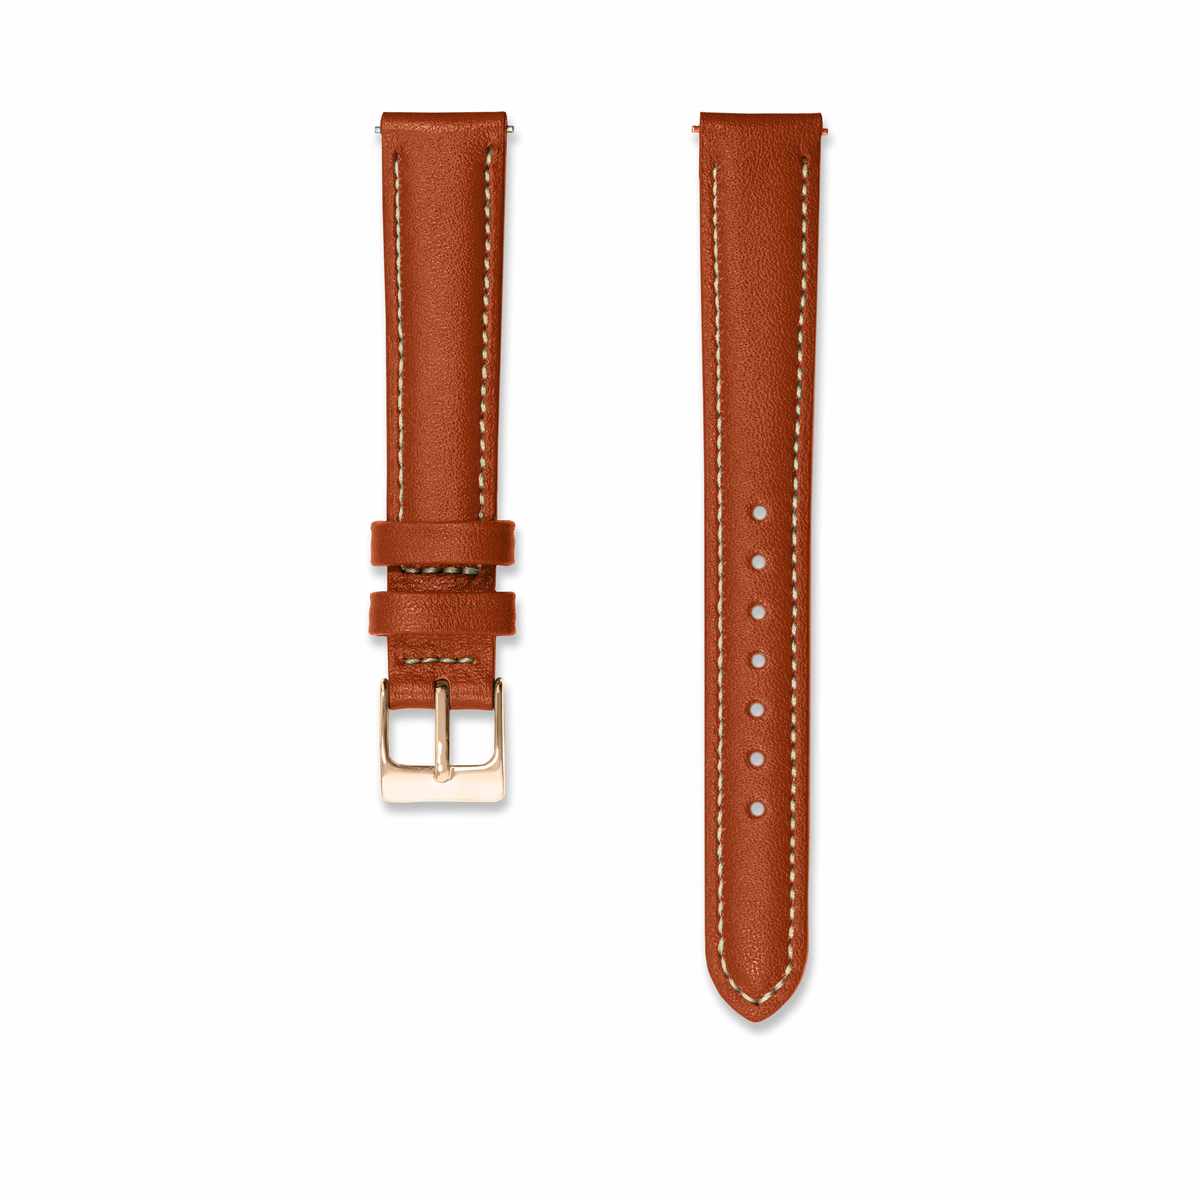 Terracotta leather strap 14mm